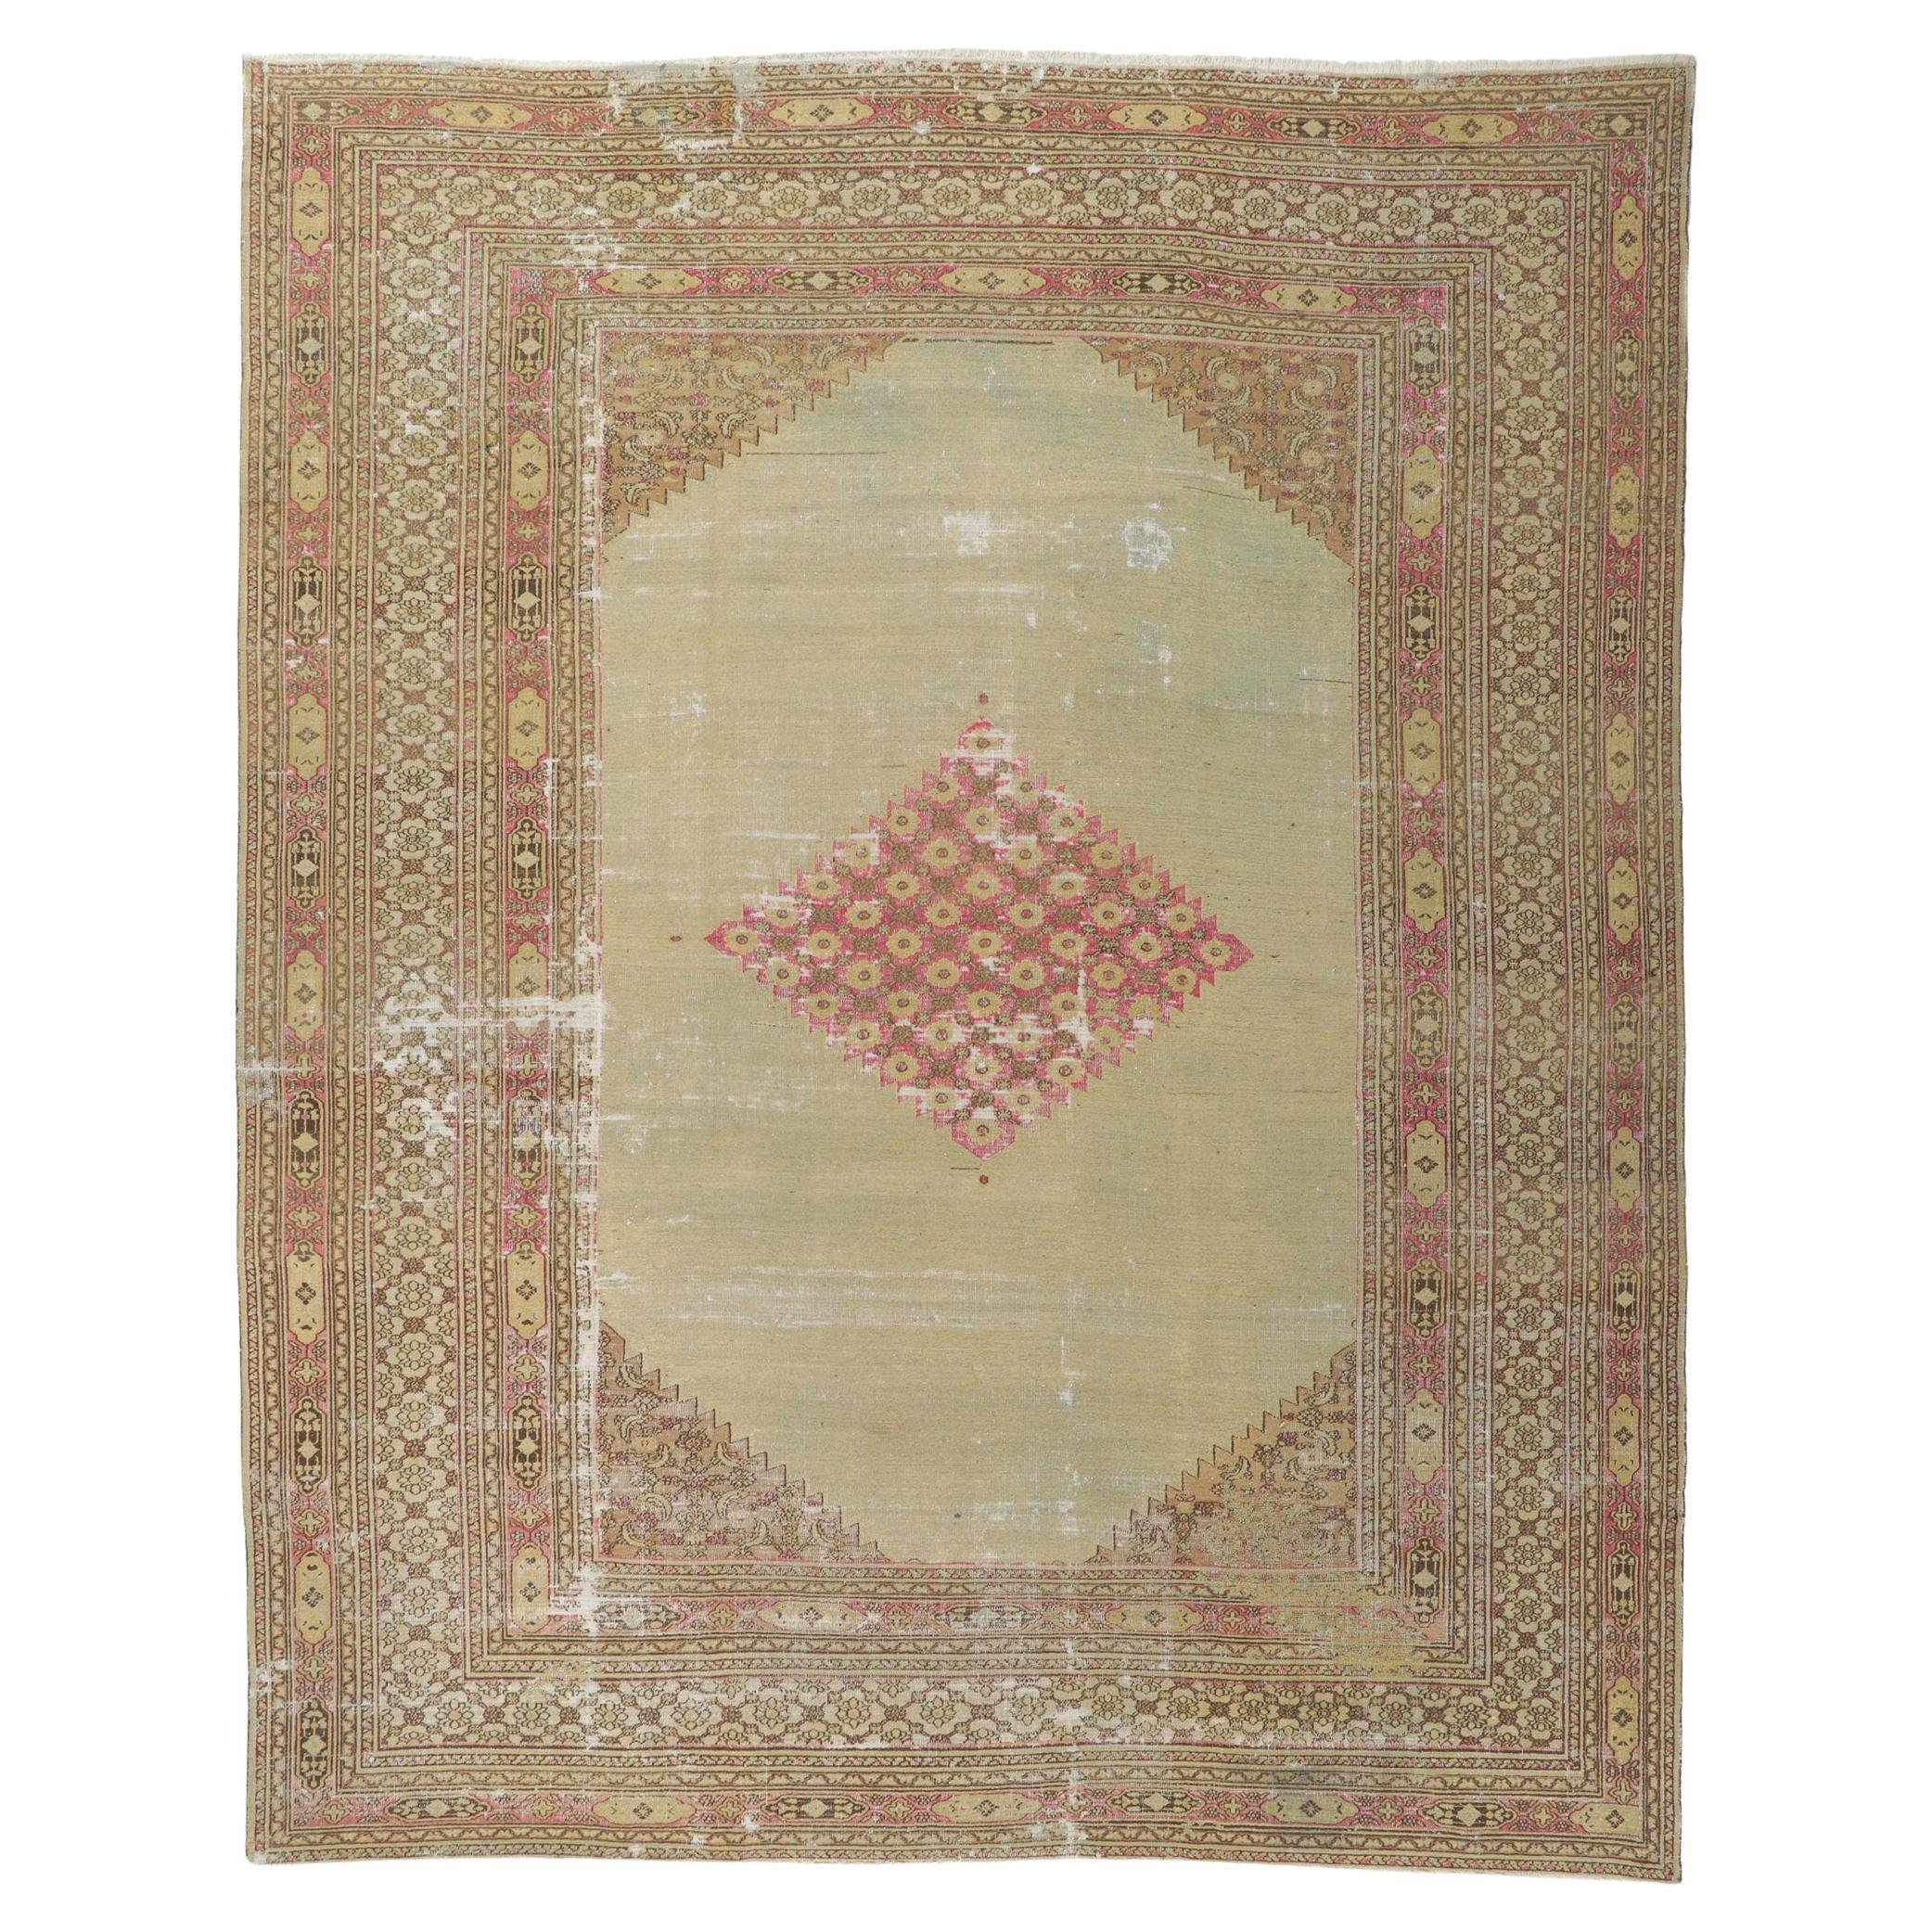 Late 19th Century Antique Persian Khorassan Rug with English Manor Style For Sale